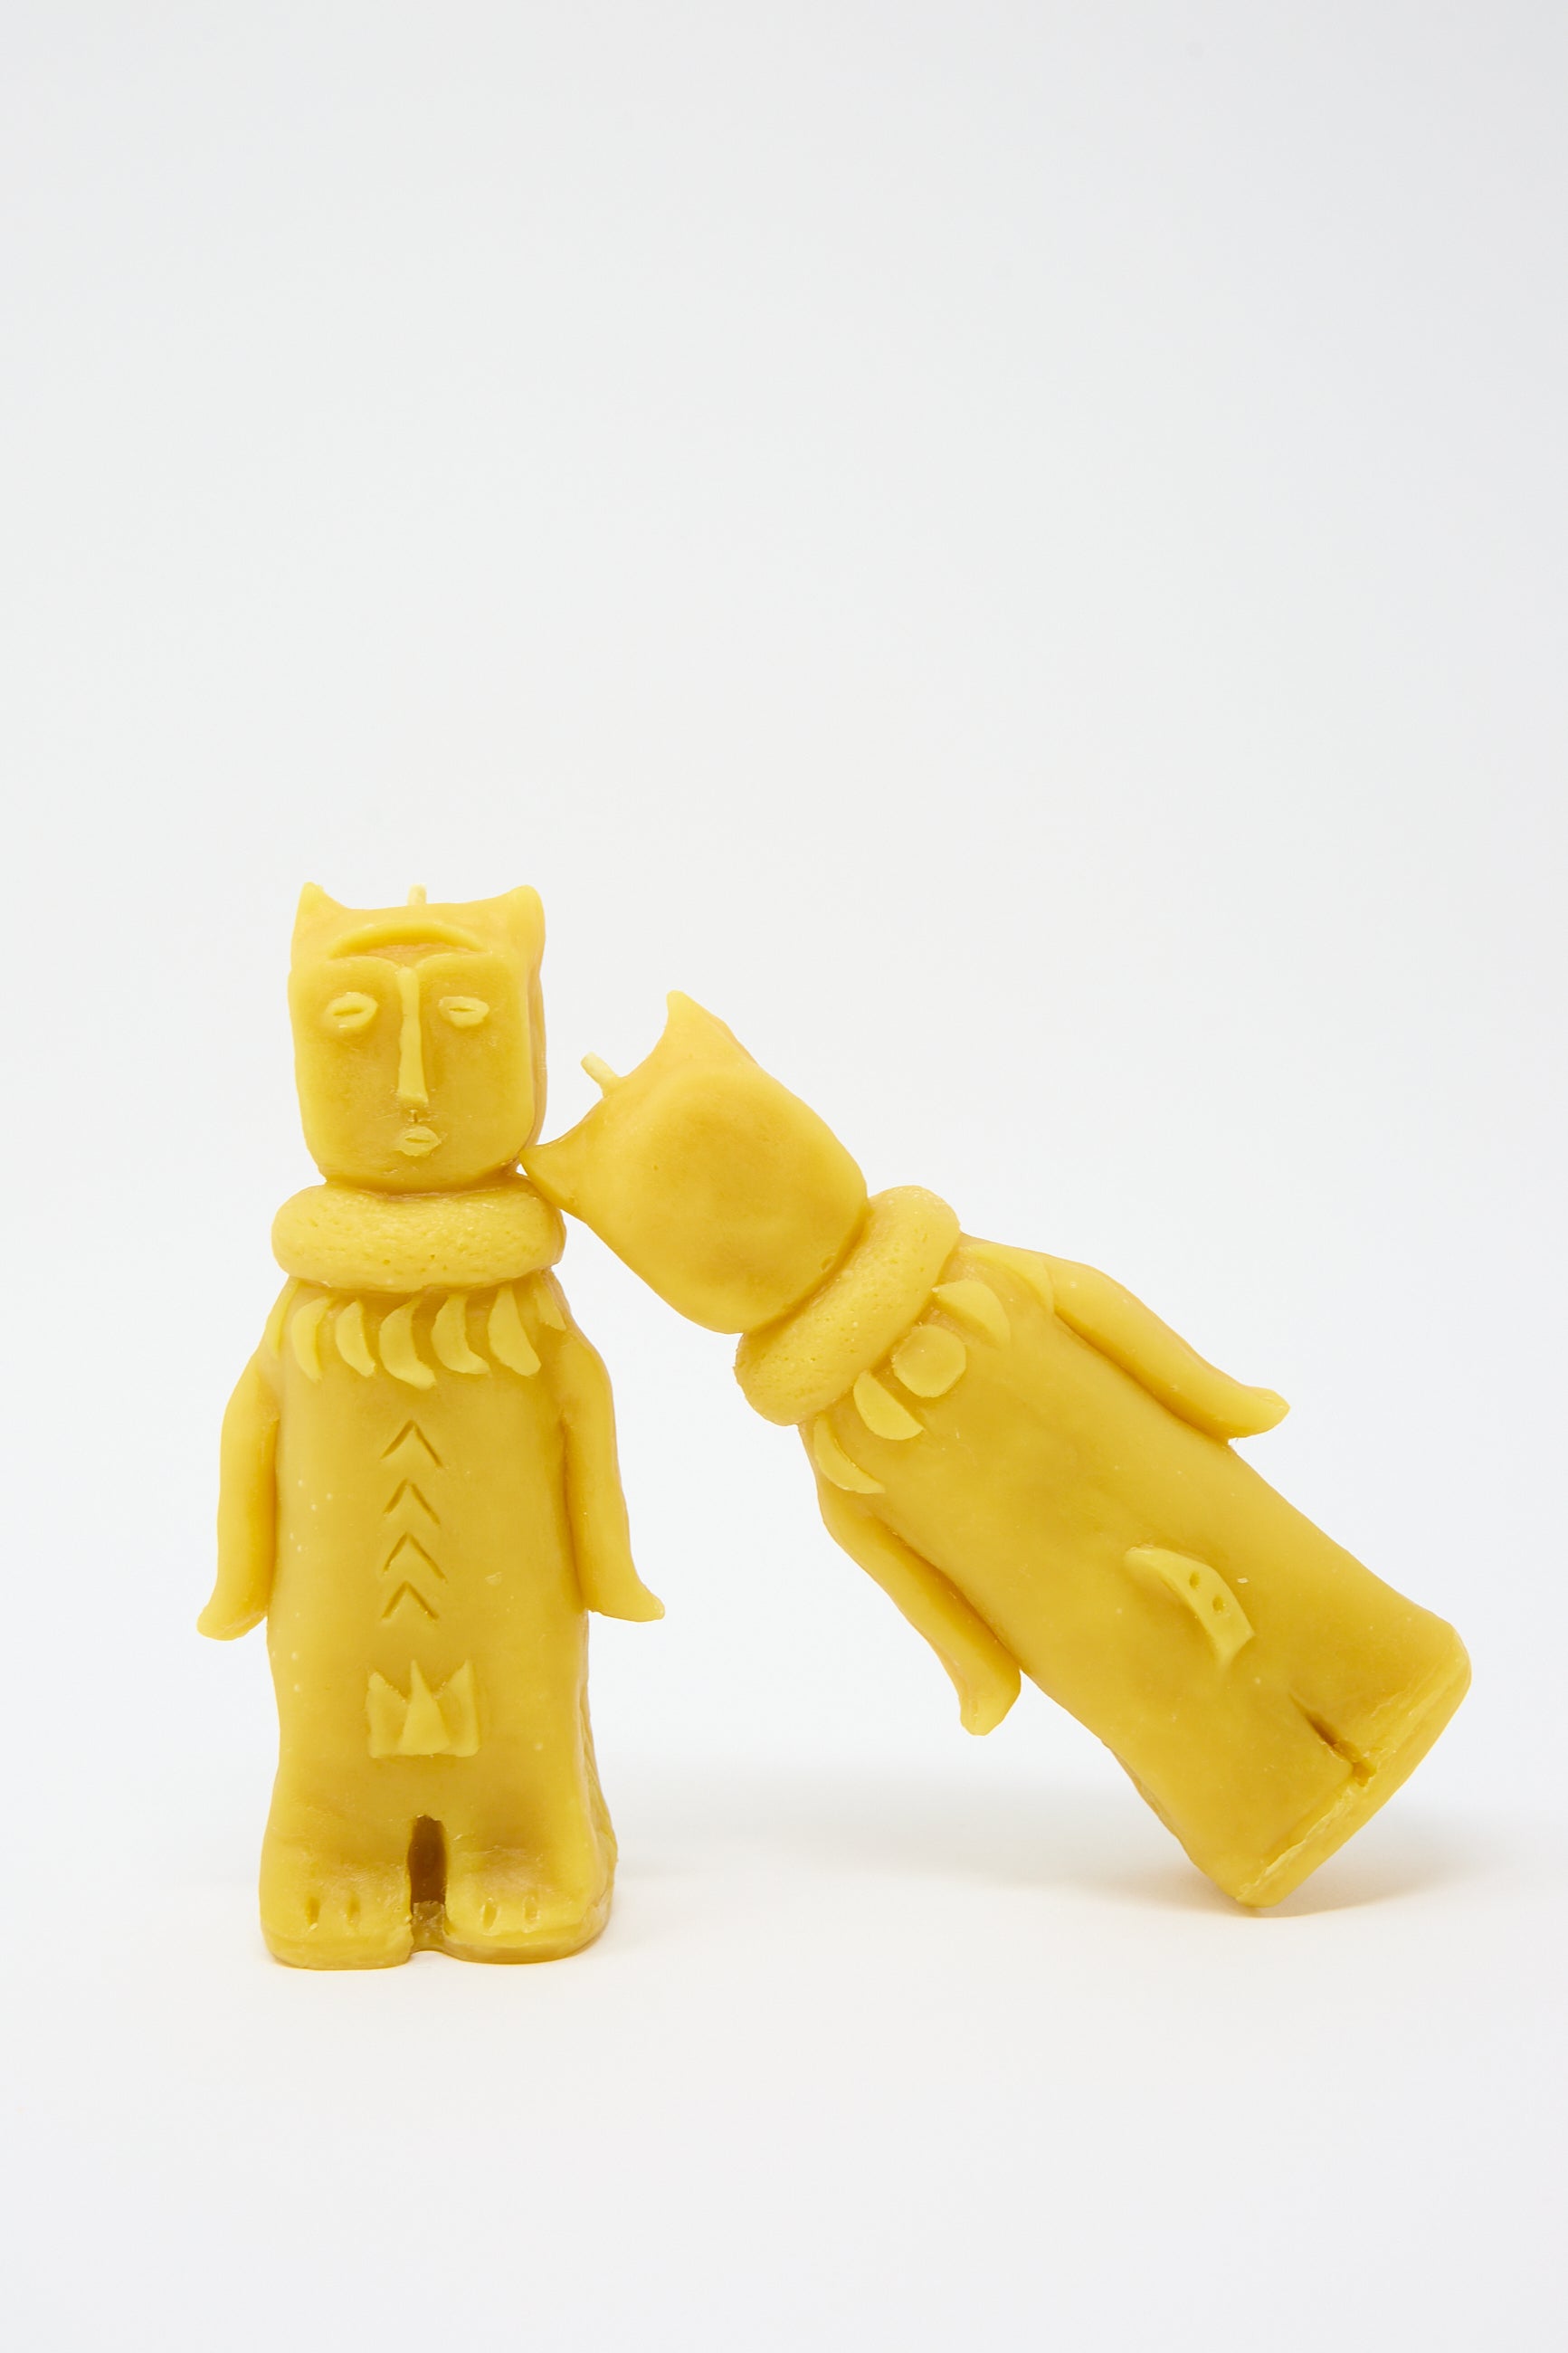 Two yellow Rinn to Hitsuji Forest Goddess Candles shaped like stylized human figures, standing upright and leaning towards each other against a white background.